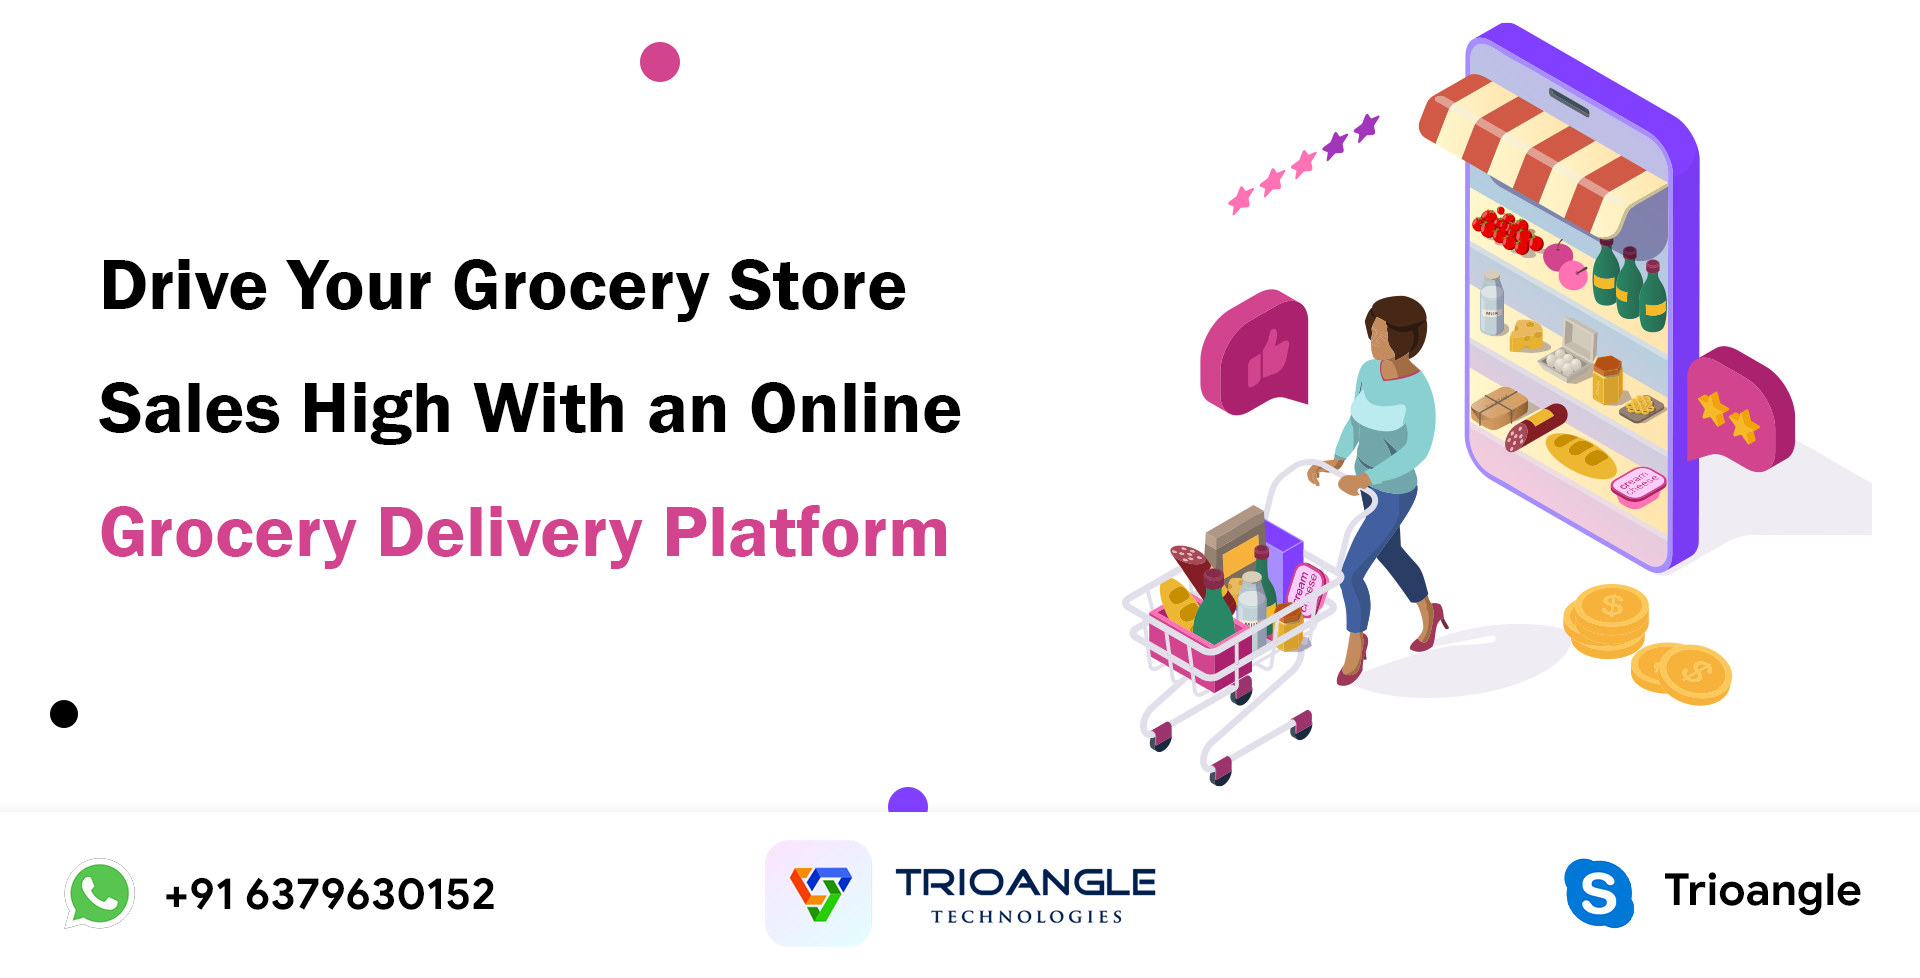 Drive Your Grocery Store Sales High With an Online Grocery Delivery Platform